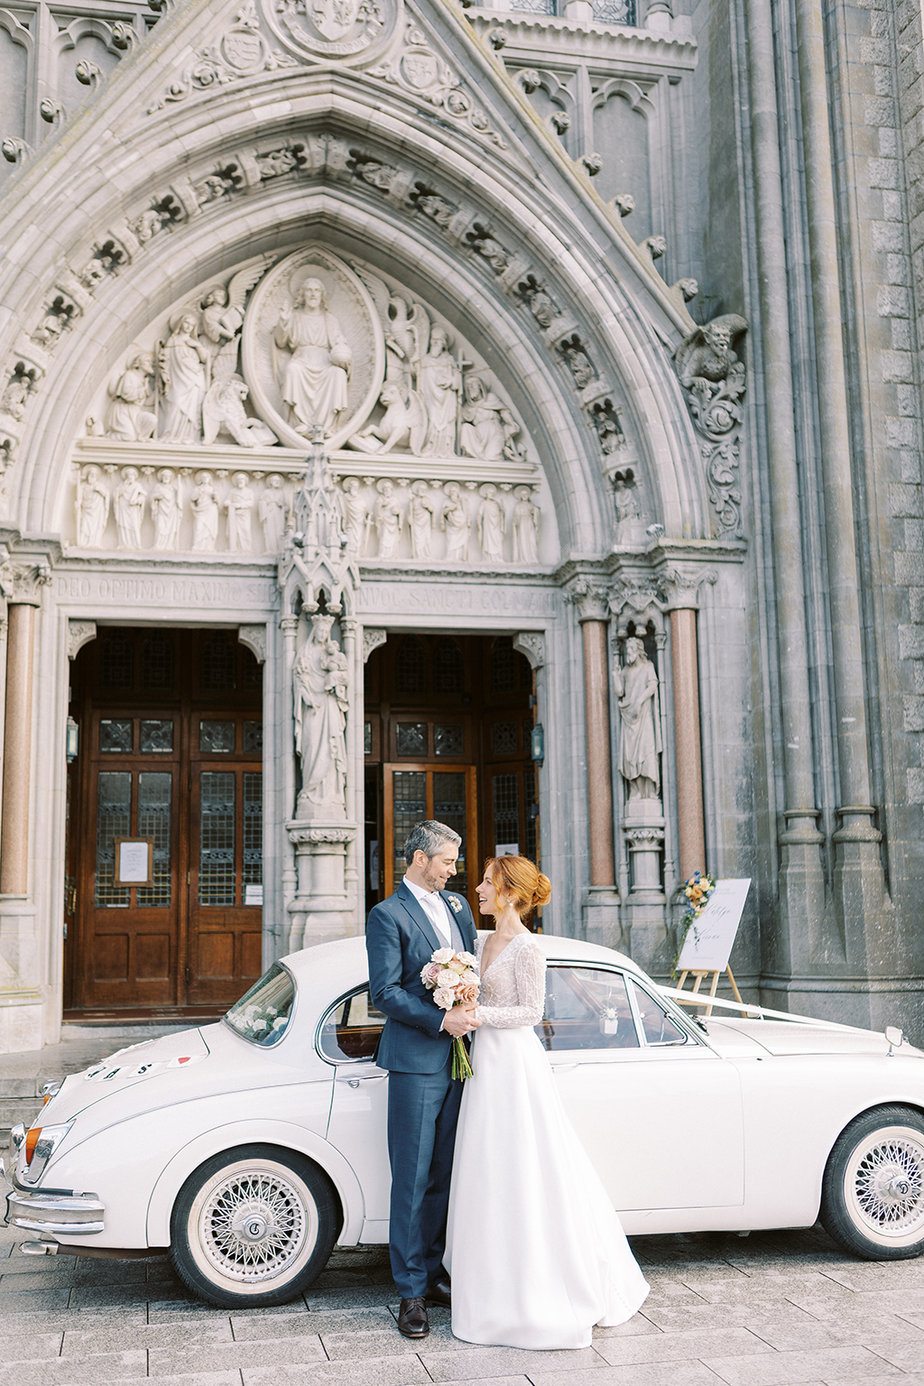 Bride and groom in front of white wedding car and in front of church cathedral